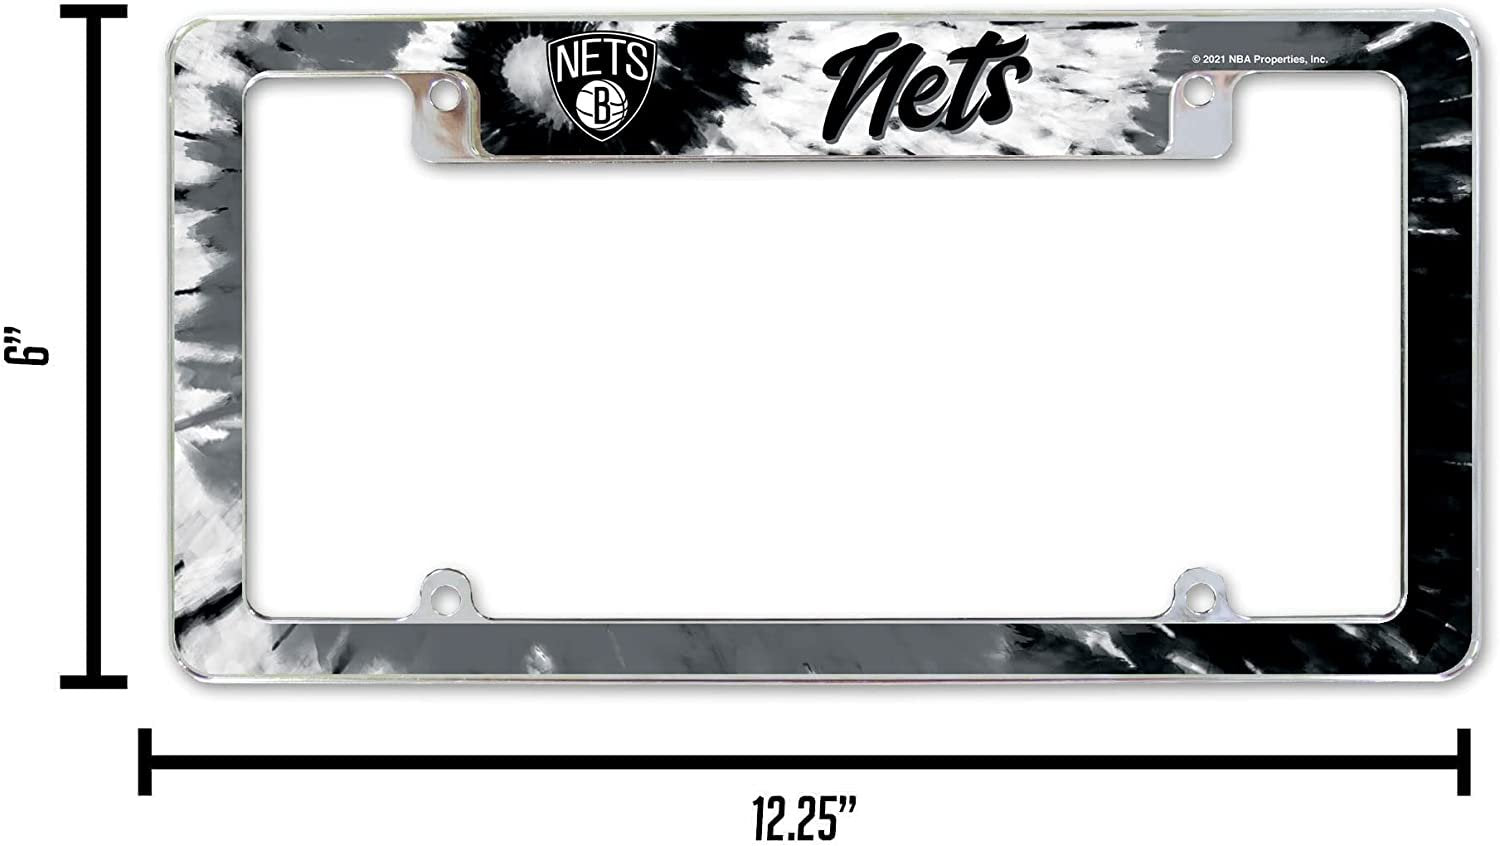 Brooklyn Nets Metal License Plate Frame Chrome Tag Cover Tie Dye Design 6x12 Inch